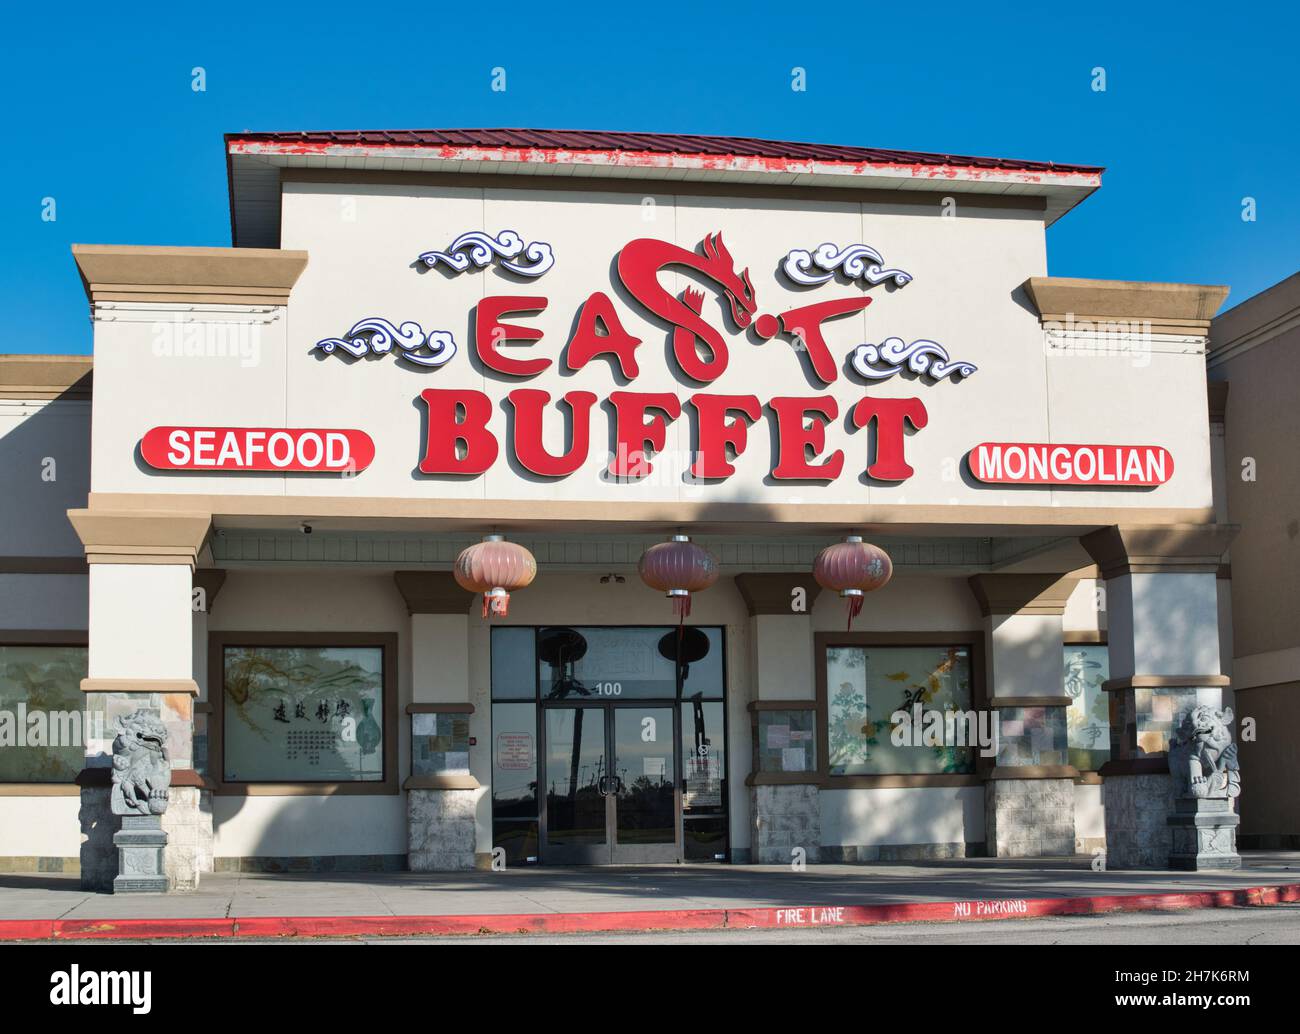 Houston, Texas USA 11-12-2021: East Buffet storefront main entrance in Houston TX. Chinese food and Mongolian grill restaurant. Stock Photo